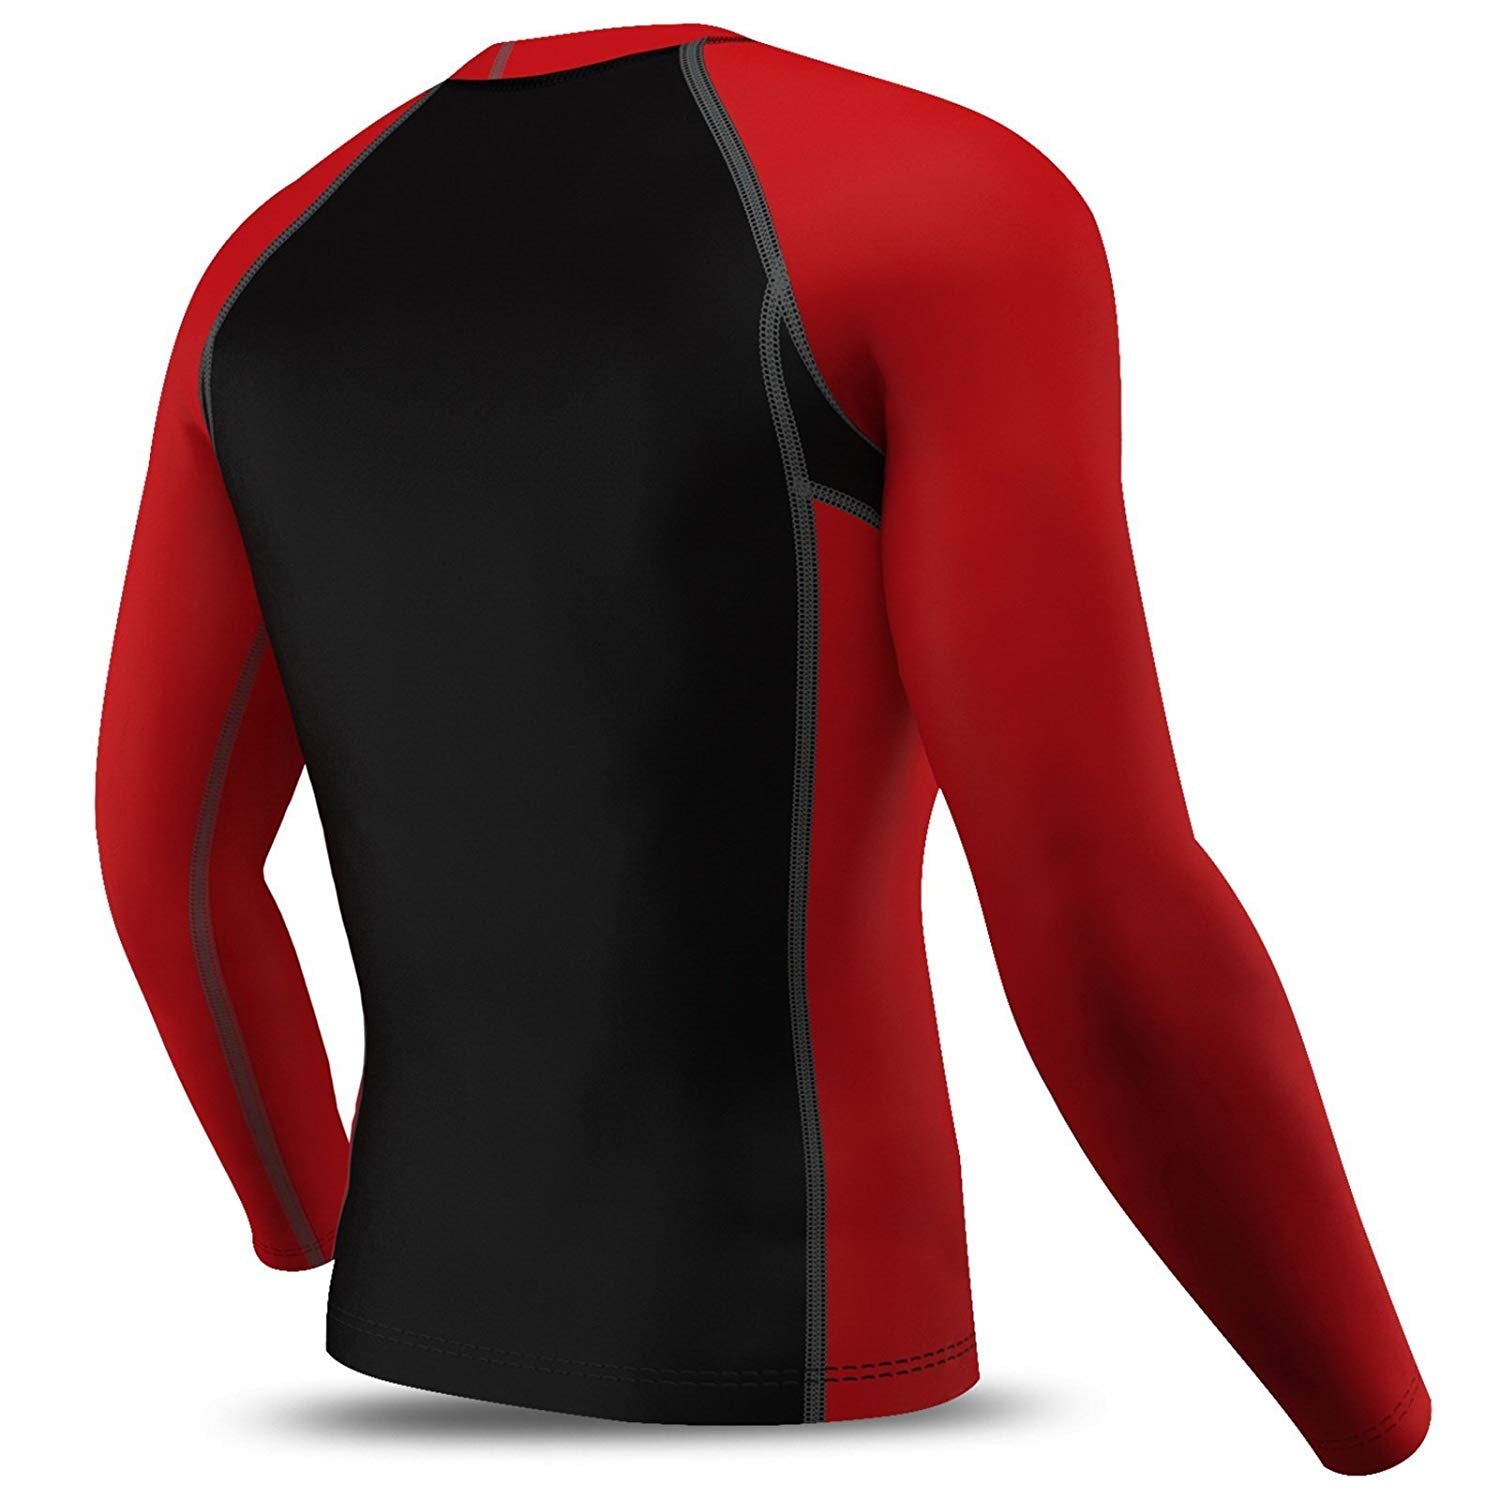 DiDOO Men's Compression Thermal Baselayer Top Long Sleeve